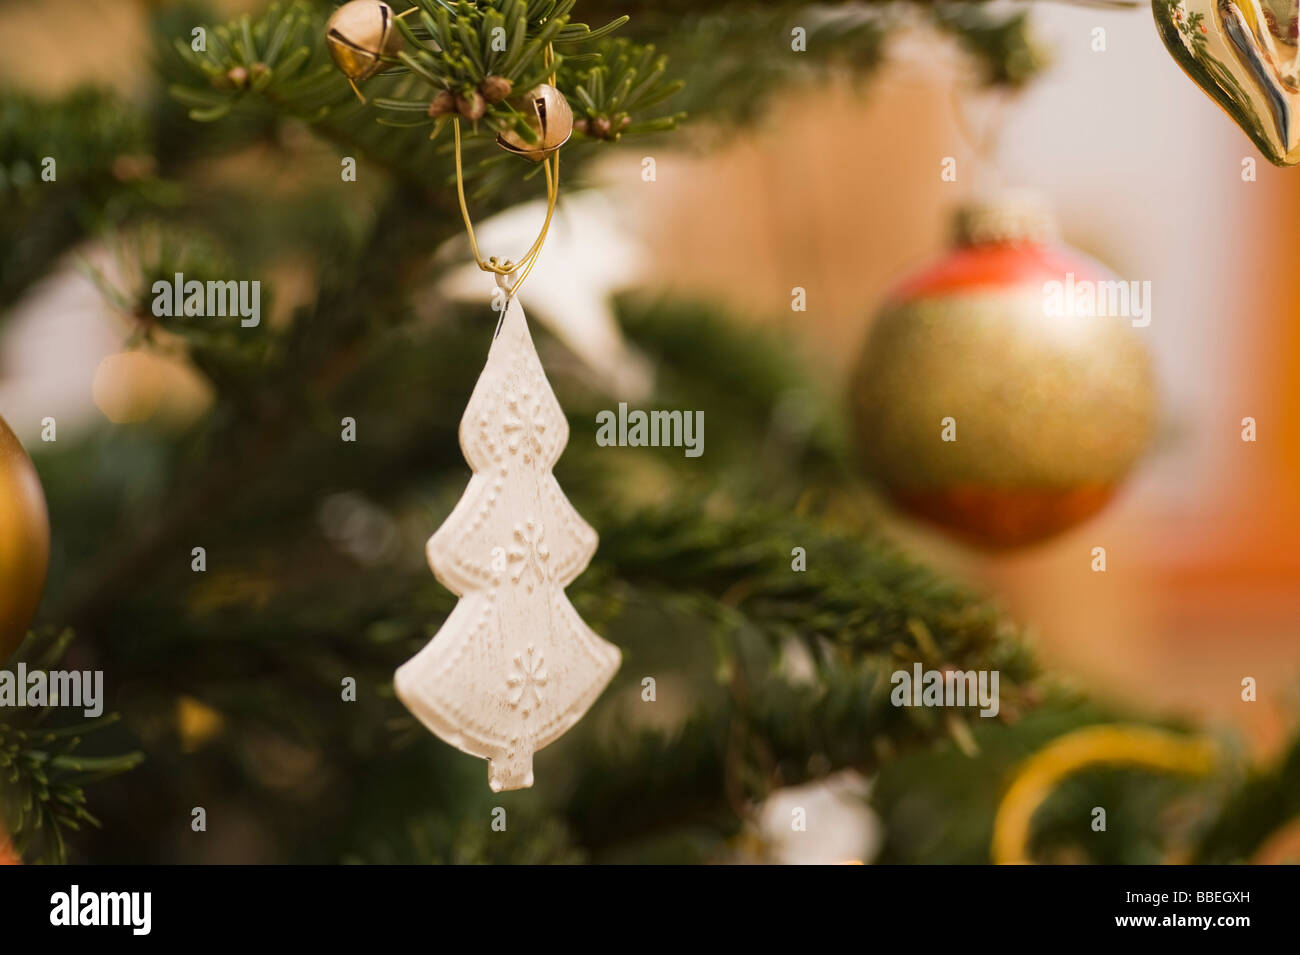 Close-up of Christmas Ornaments on Christmas Tree Stock Photo